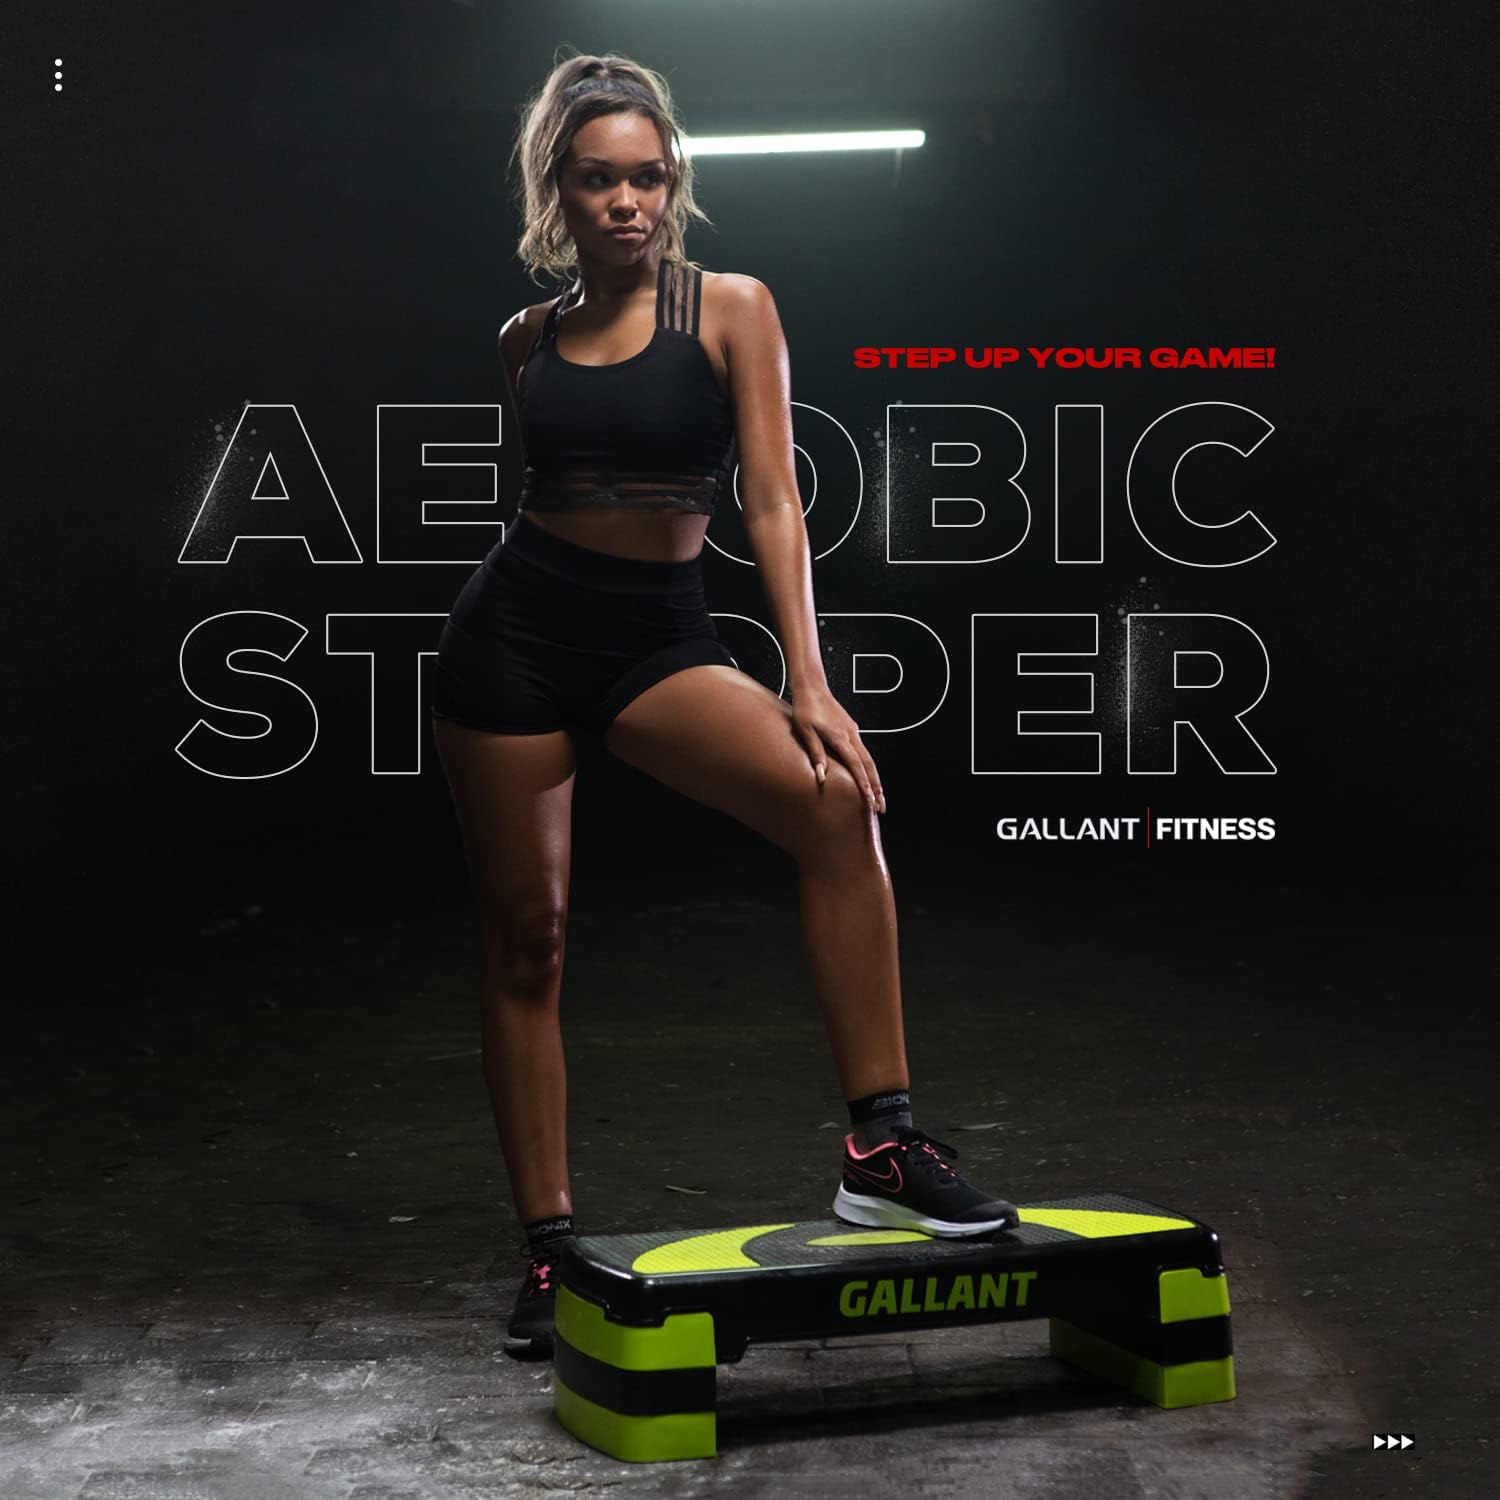 Aerobic Step - 3 Levels of Height Adjustable Step Up Your Game details. 